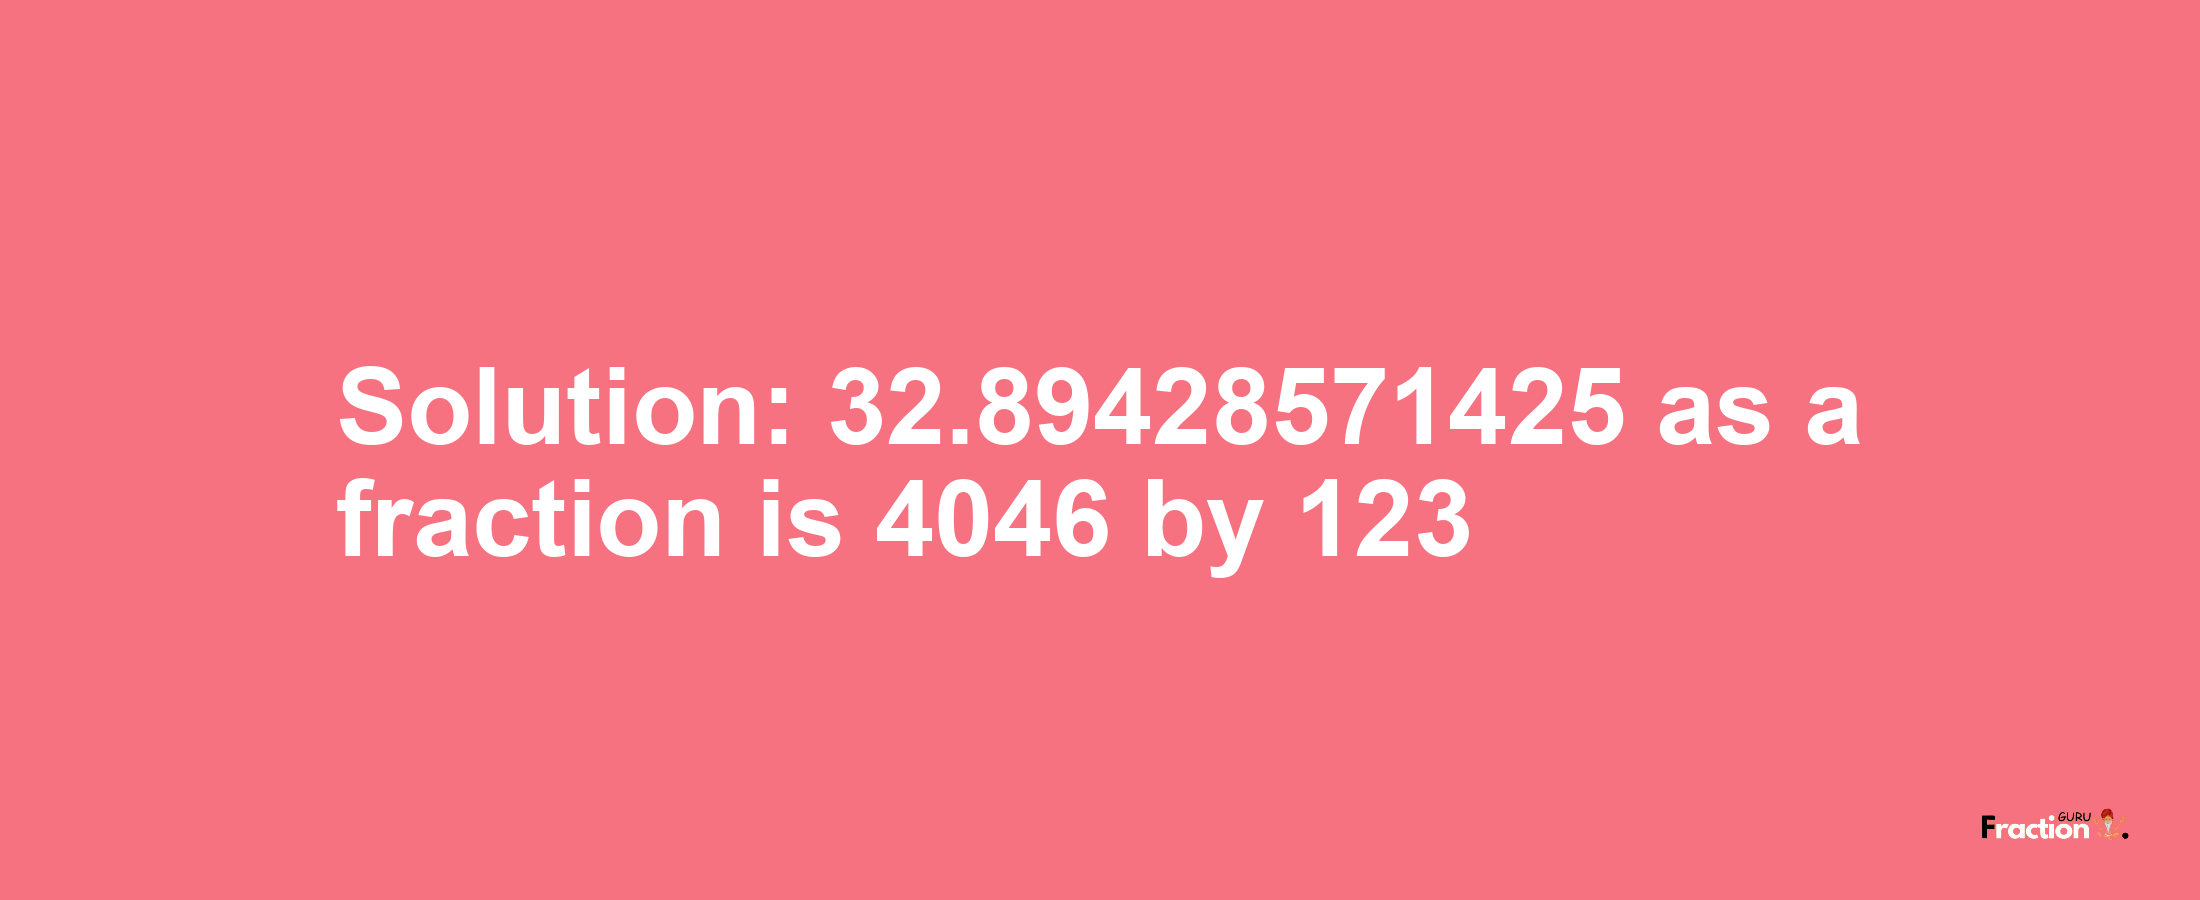 Solution:32.89428571425 as a fraction is 4046/123